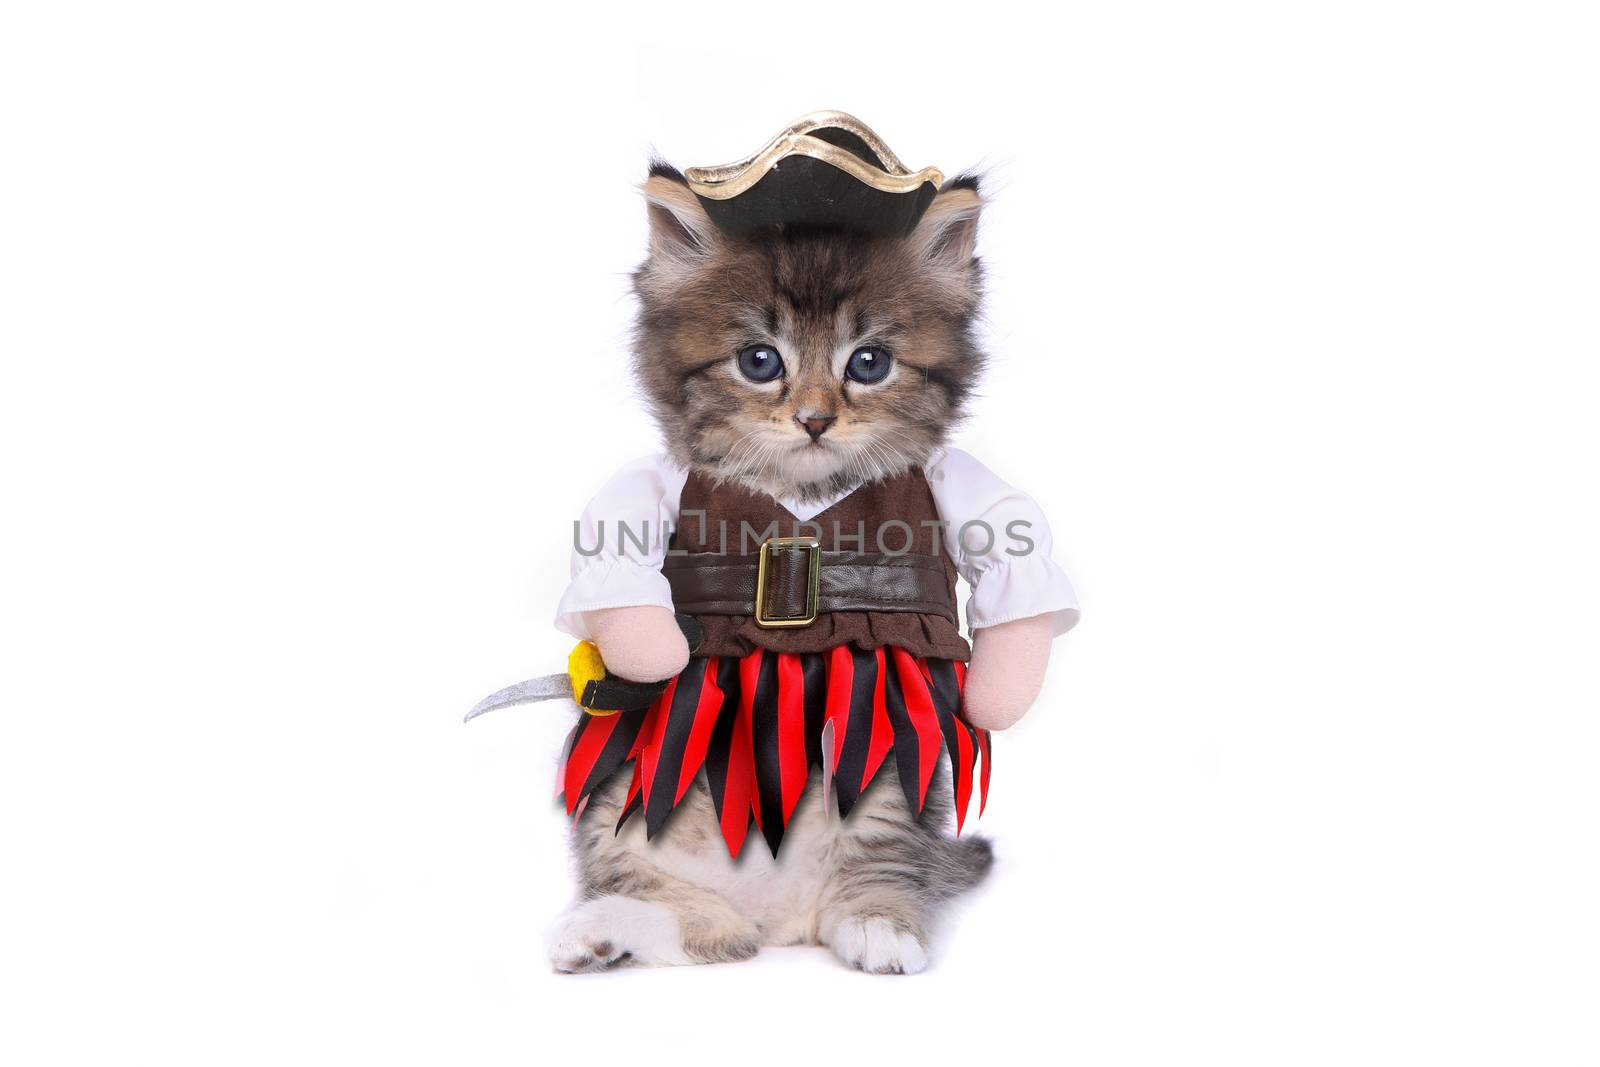 Serious Kitten in Pirate Inspired Clothing Costume by tobkatrina